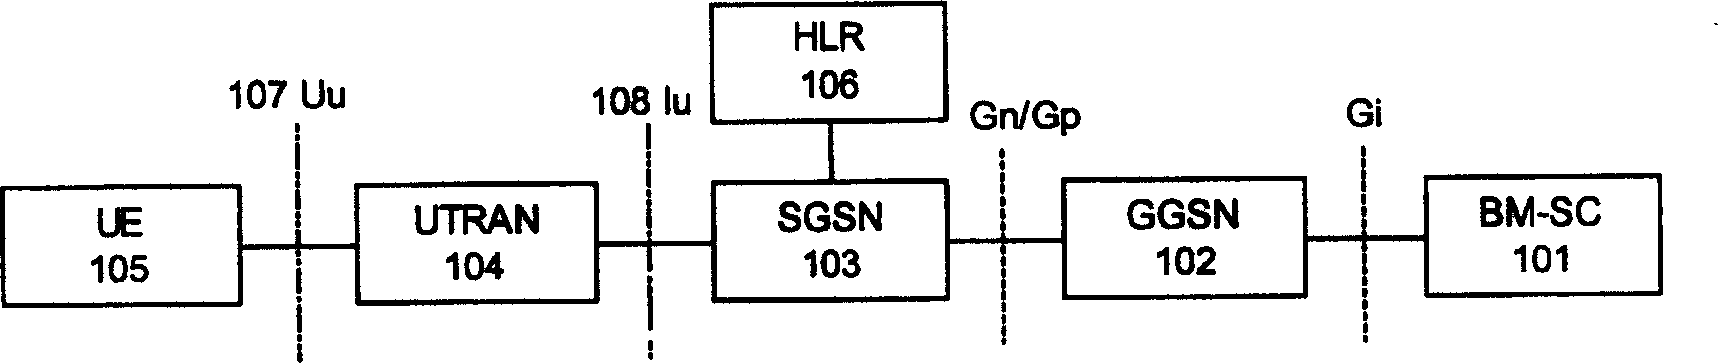 Method for paging MBMS in wideband TDD mobile communication system